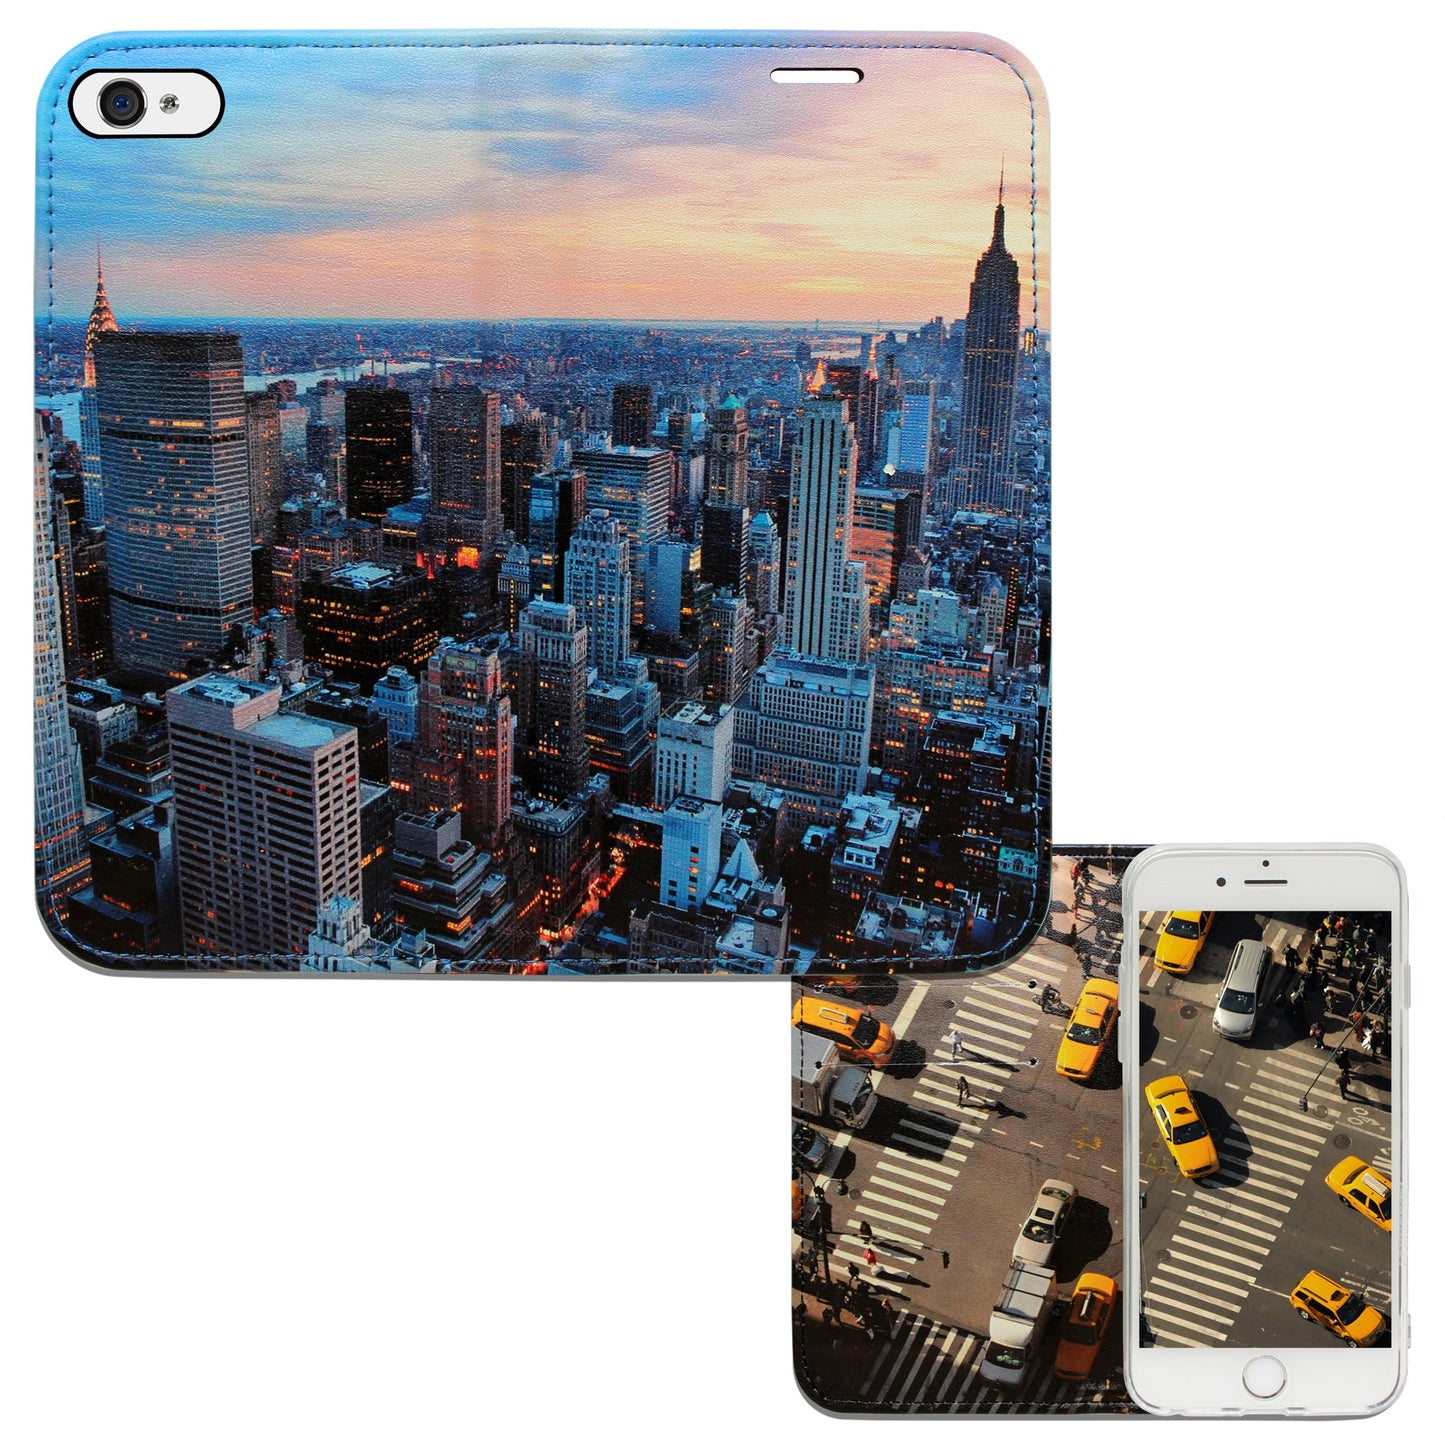 Coque Panorama New York City pour iPhone 5/5S/SE 1